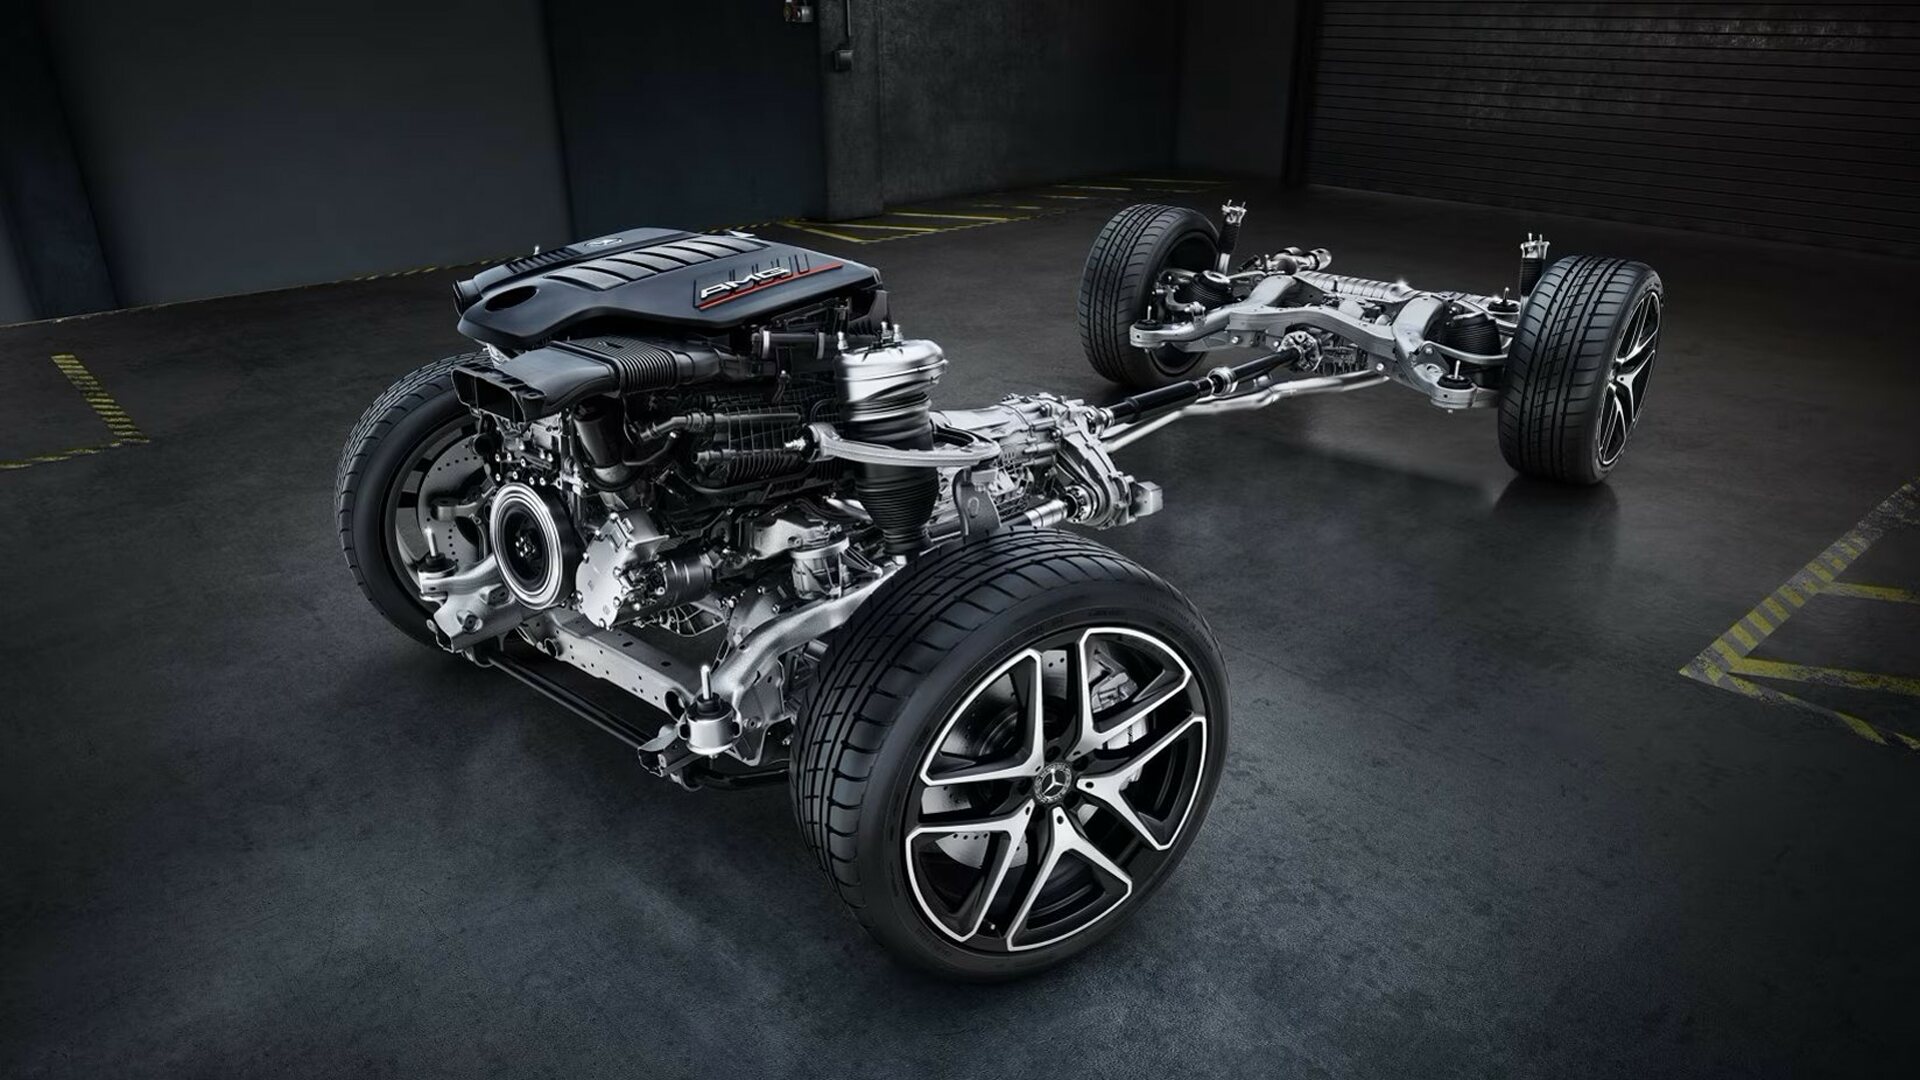 The Modified In-Line 6-Cylinder Engine Of The 2025 Mercedes-AMG E53 Hybrid 4Matic+